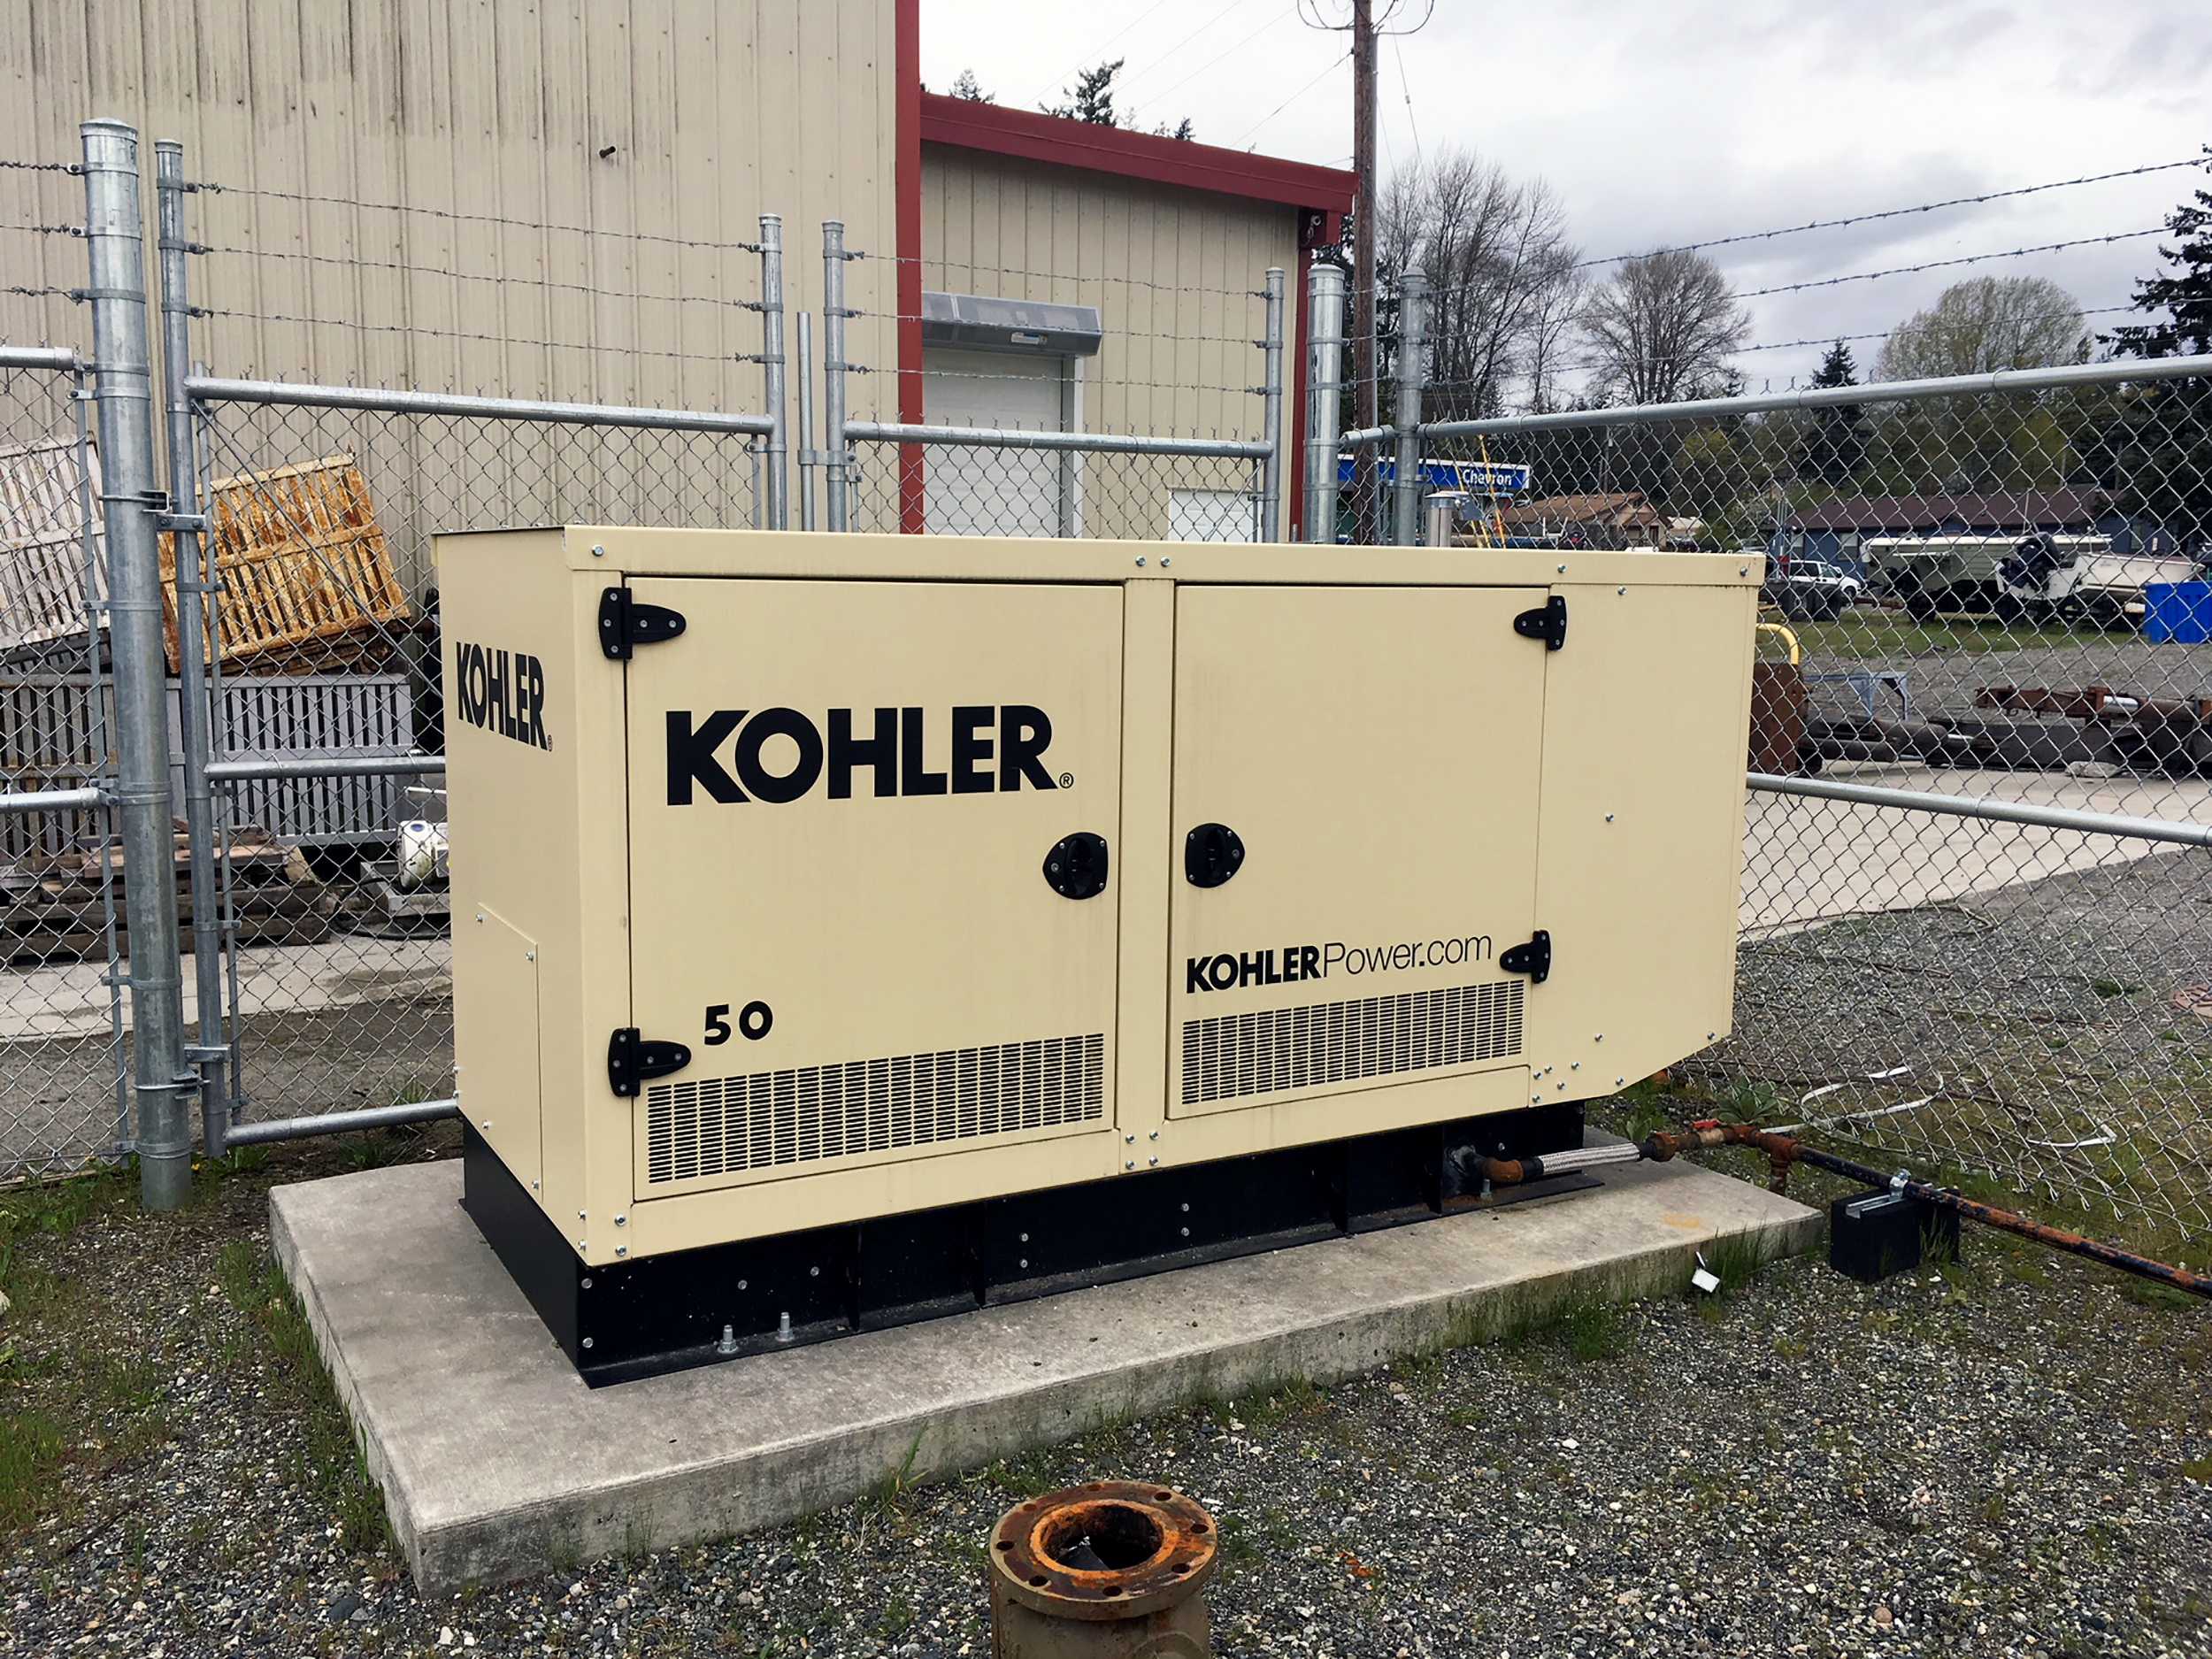  The Swinomish Utility Authority also secured an emergency generator, enabling the ability to pump water if electricity is otherwise inaccessible. 